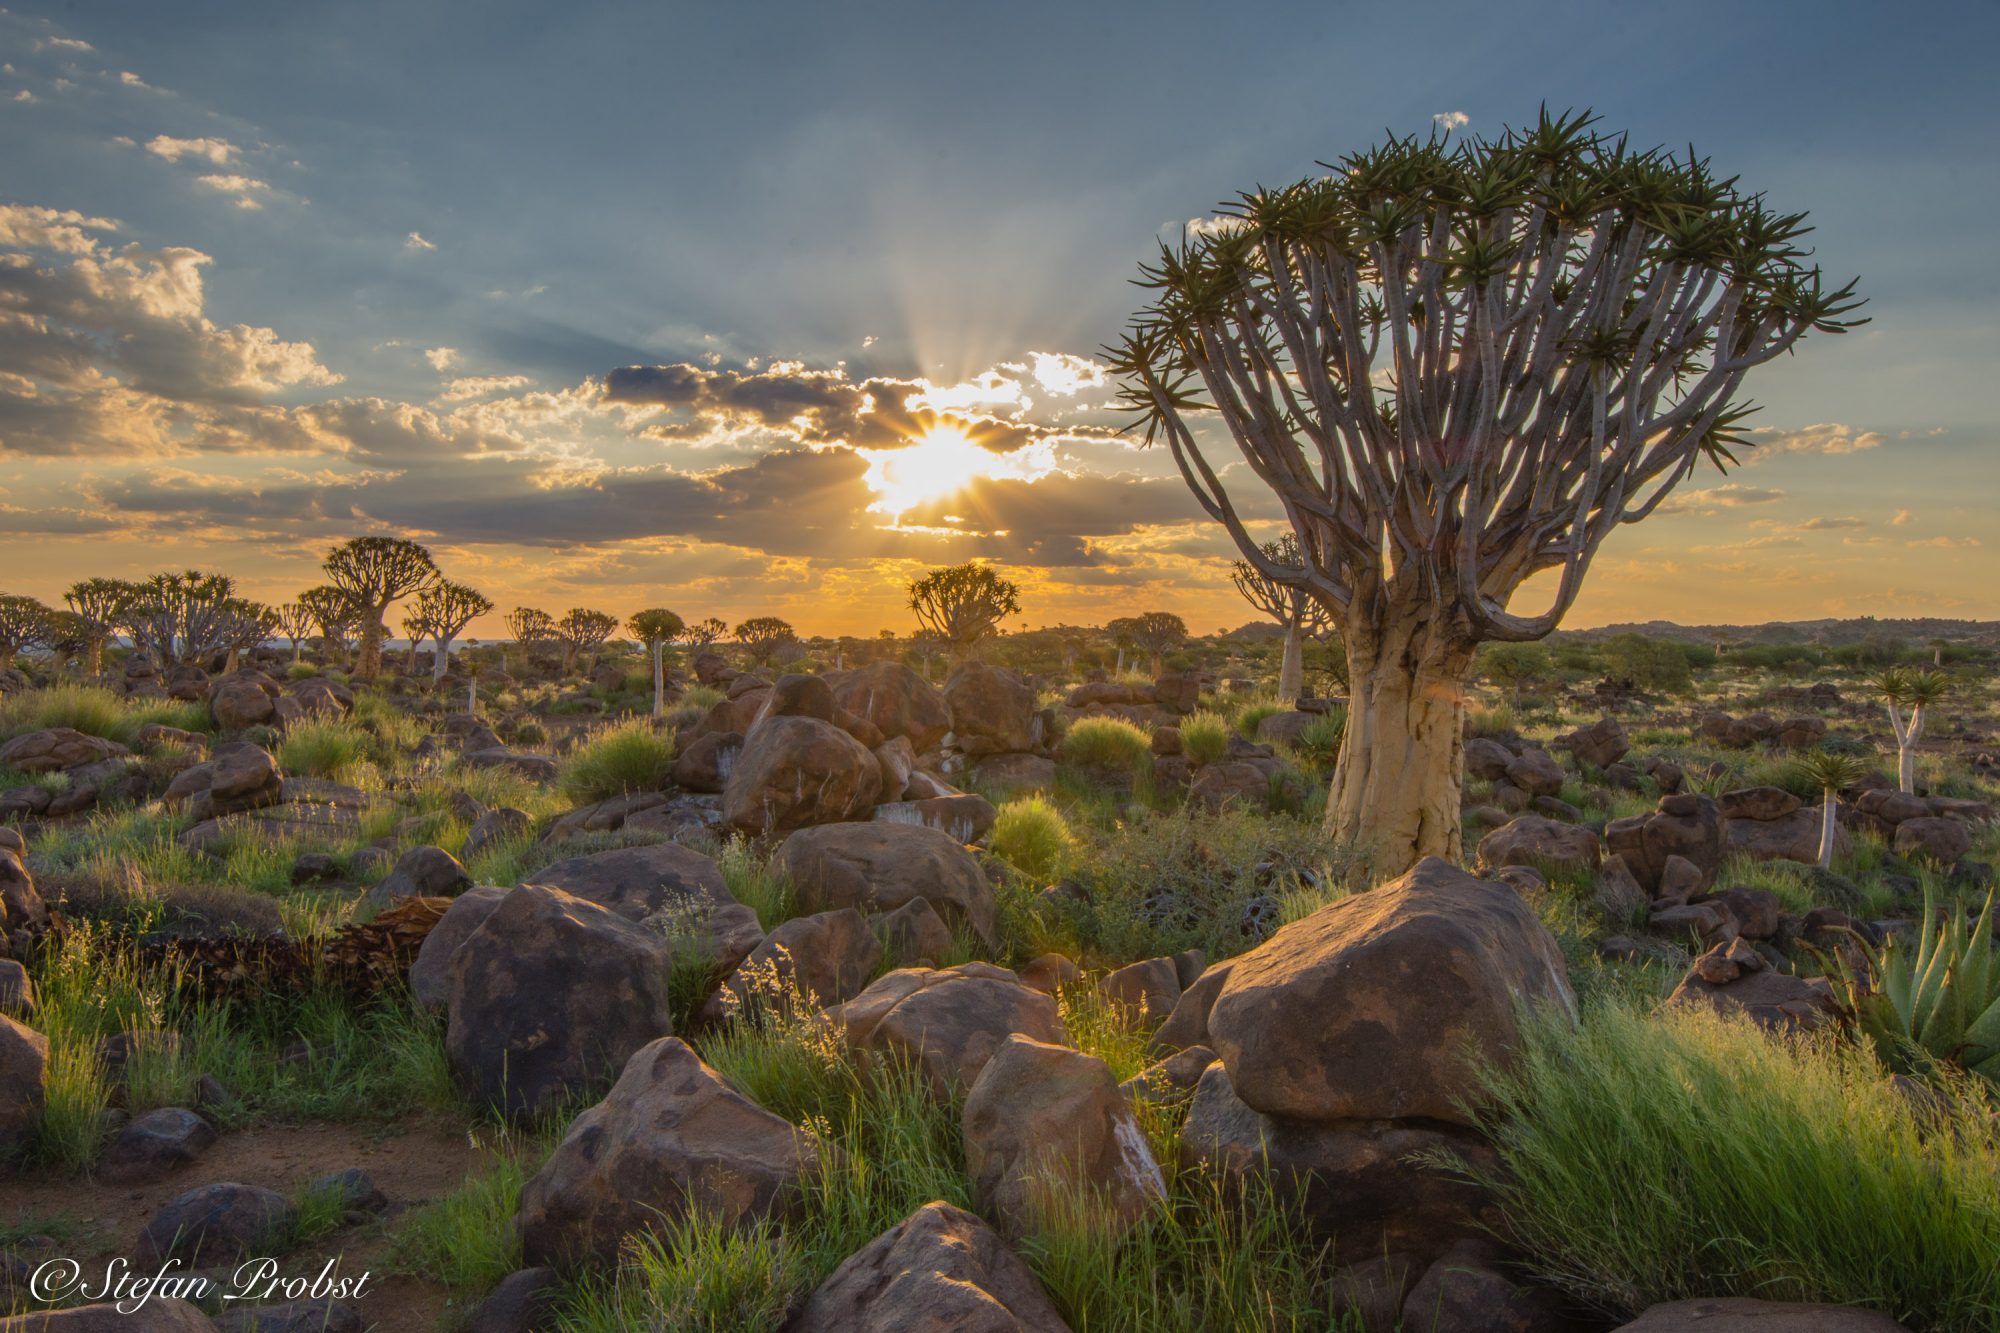 Namibia - Quivertree Forest Keetmanshoop